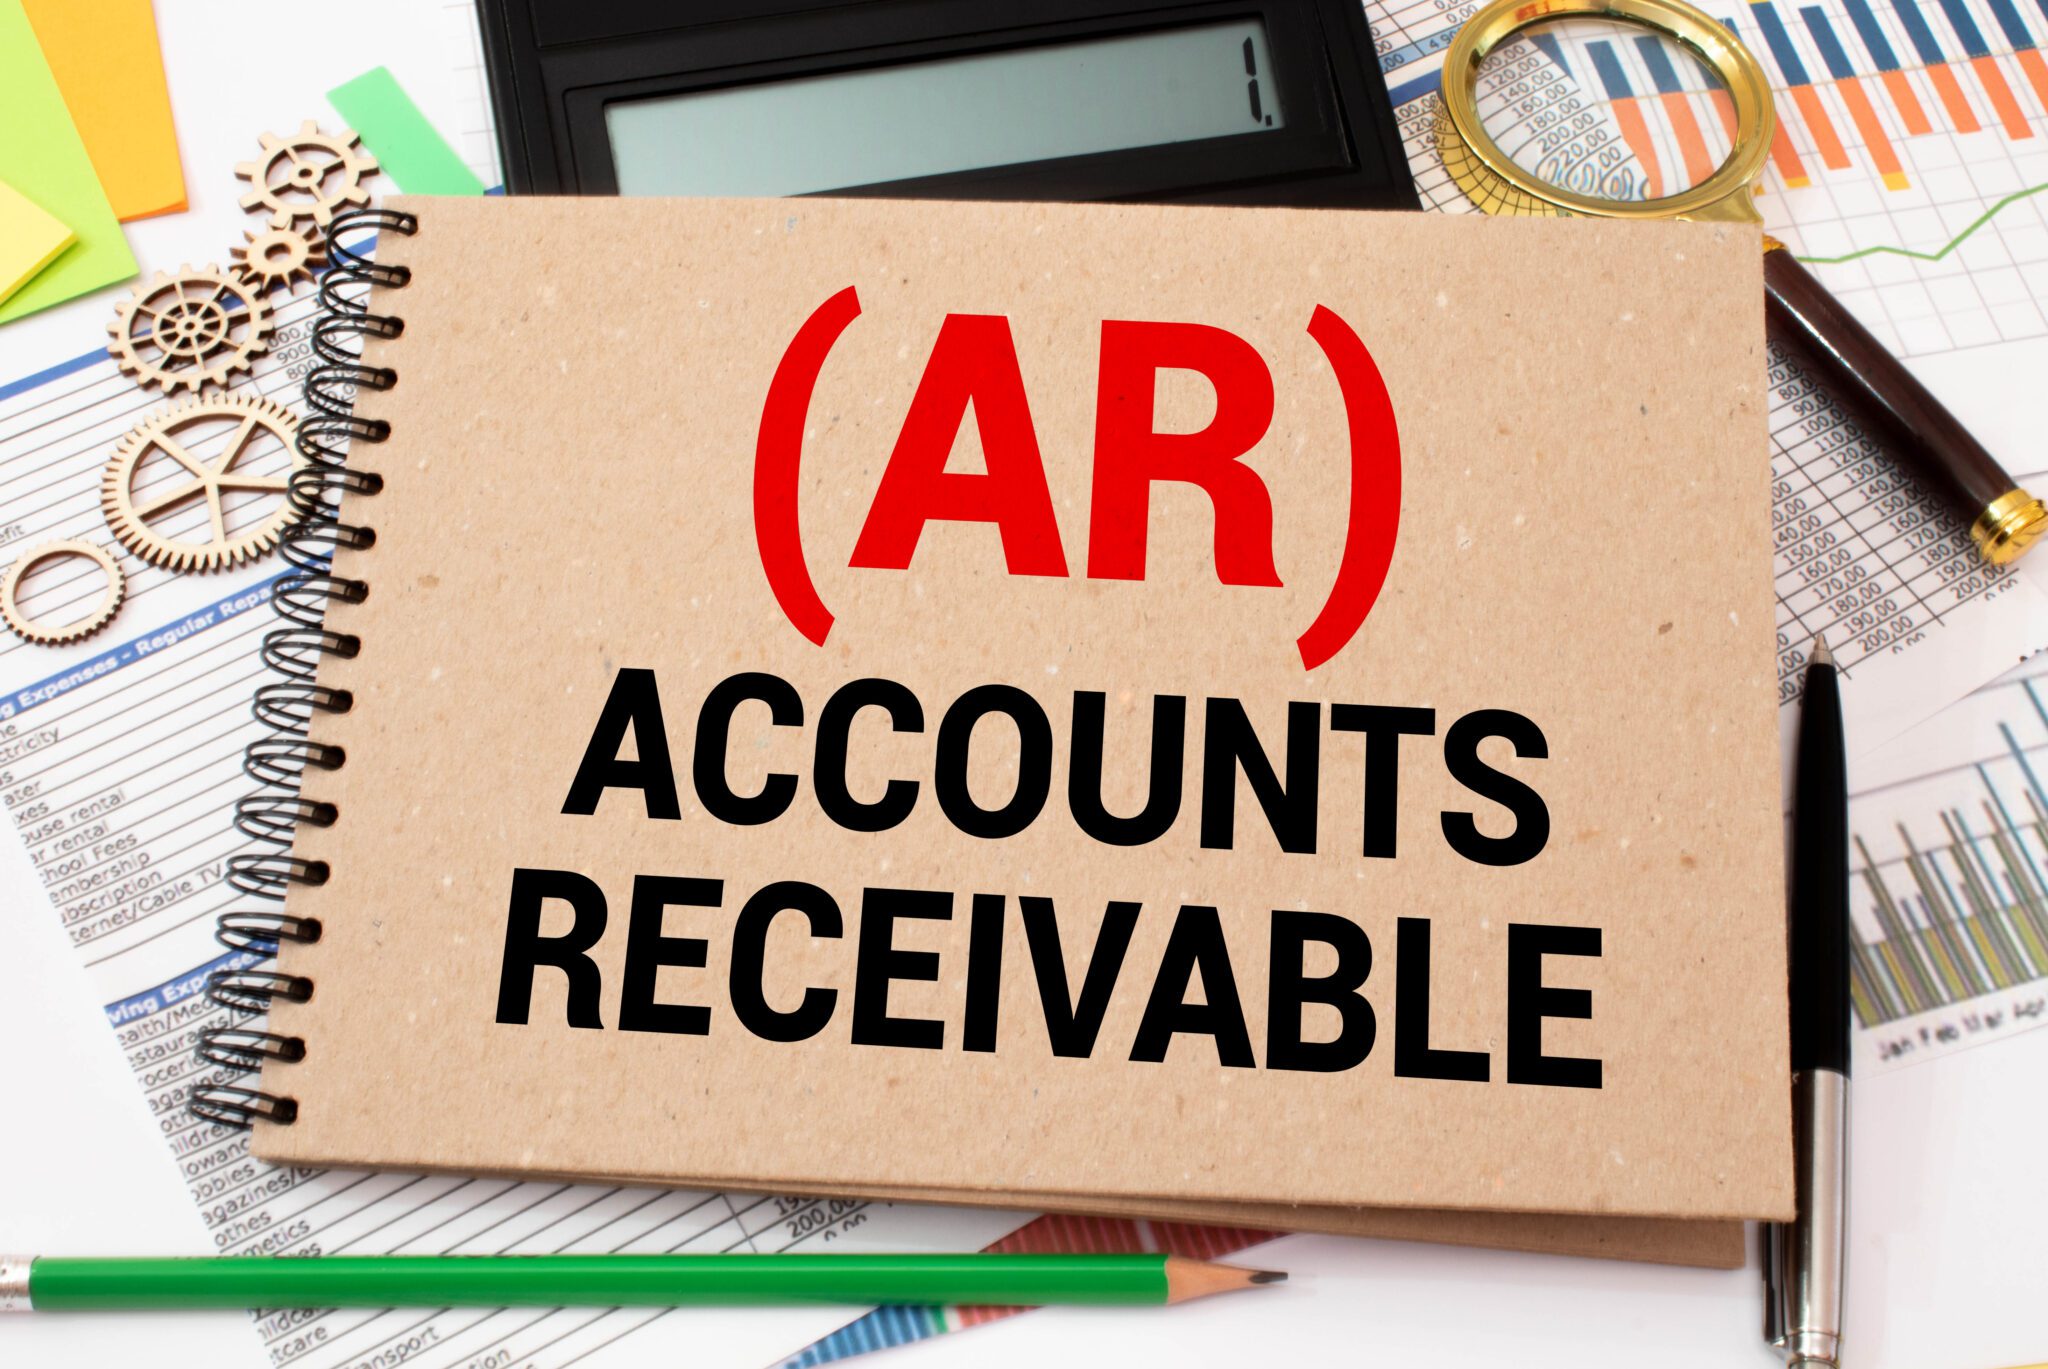 Finance a Business through Accounts Receivable Financing